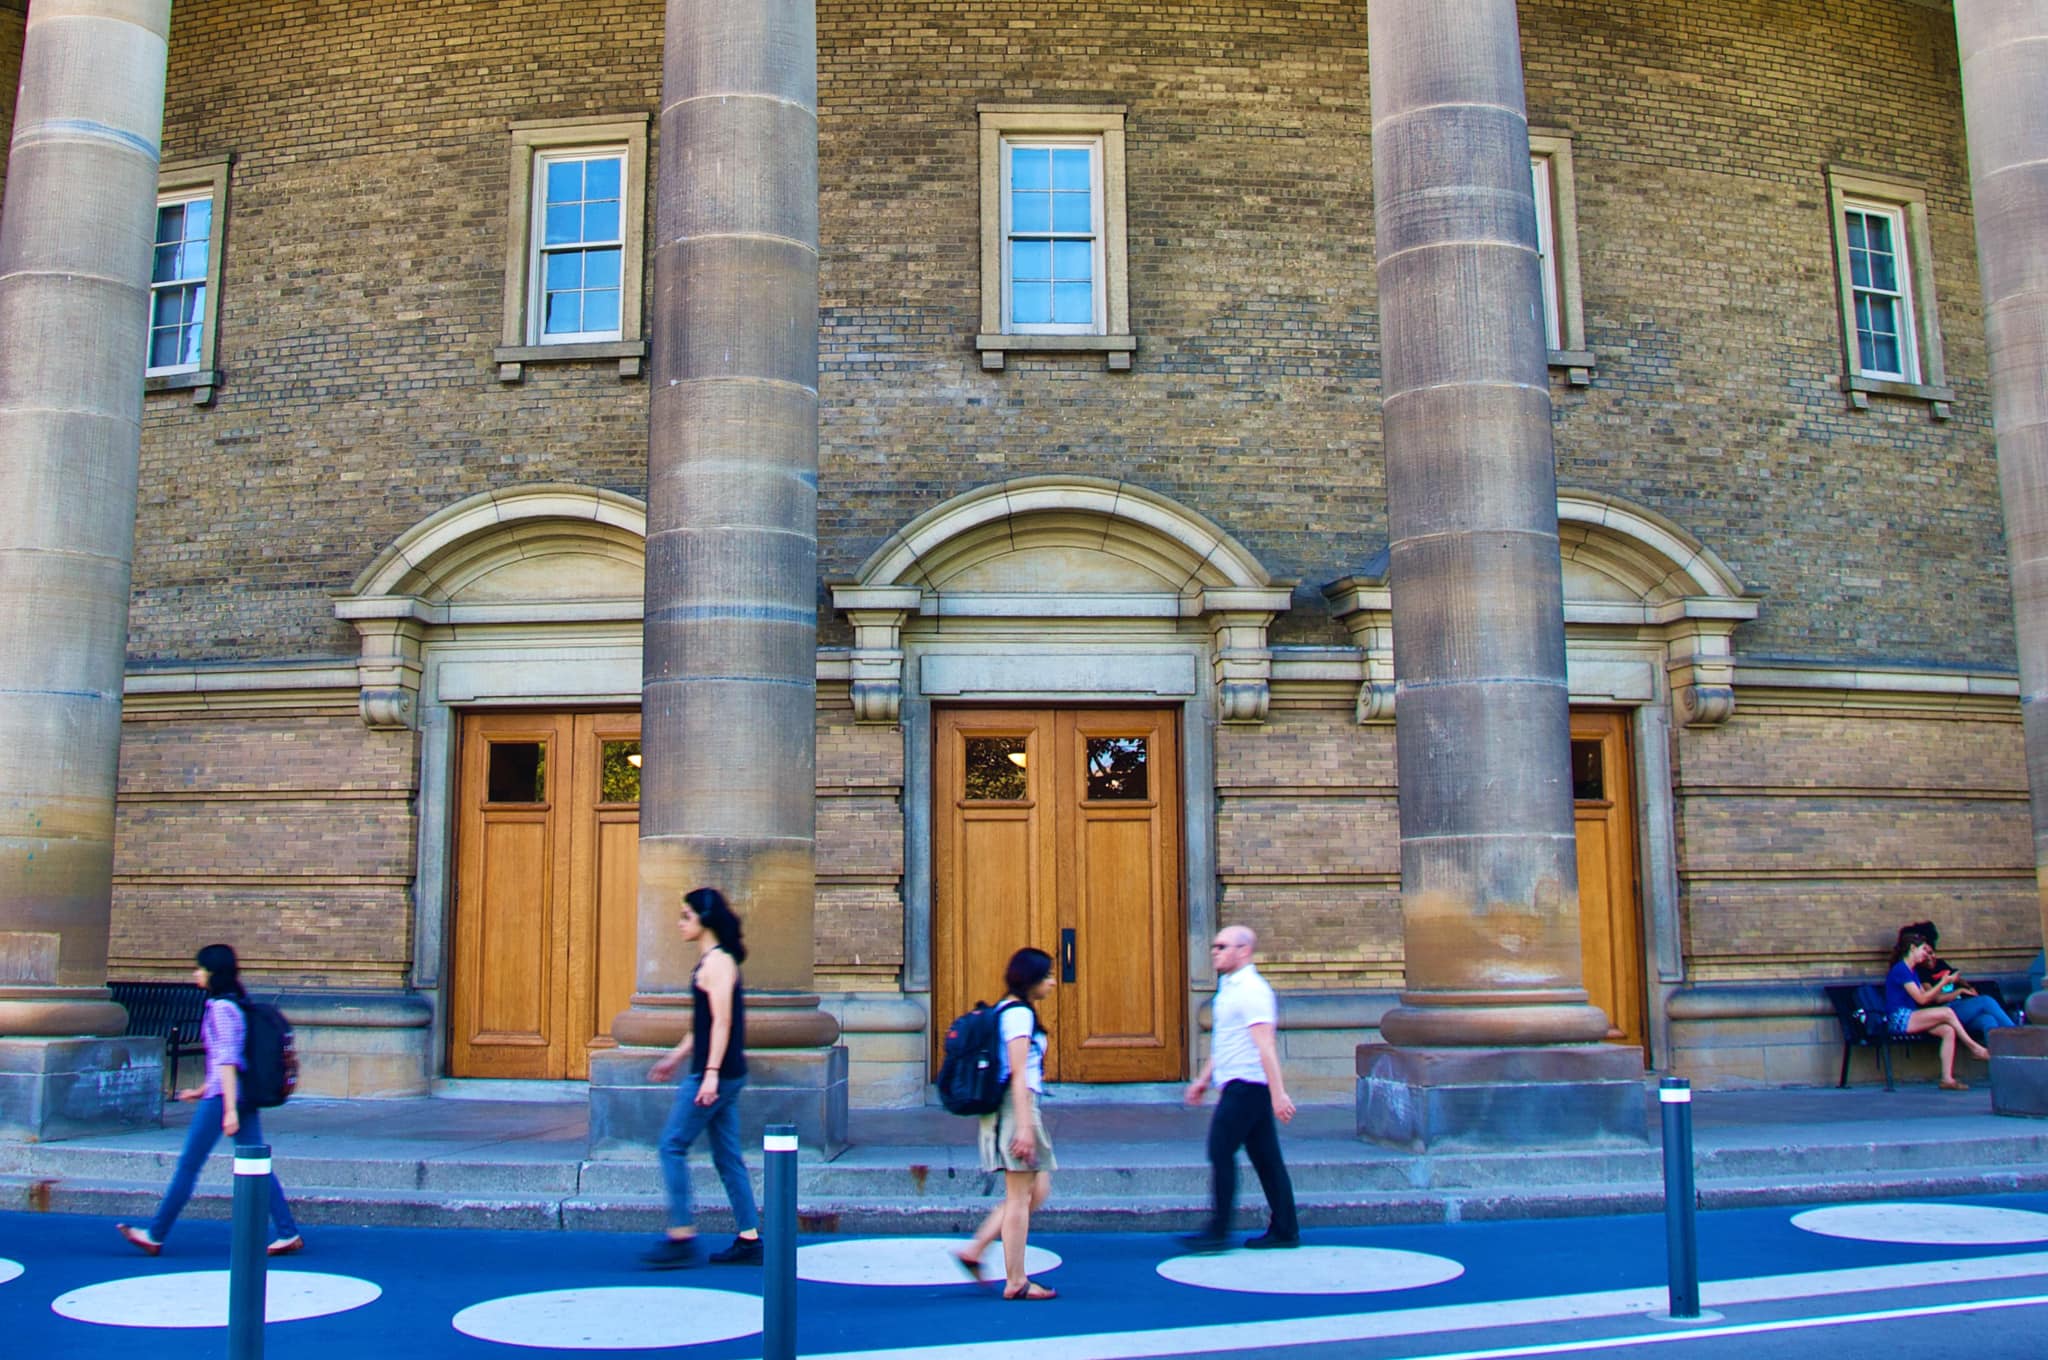 Students walk past the pillars in front of Convocation Hall.